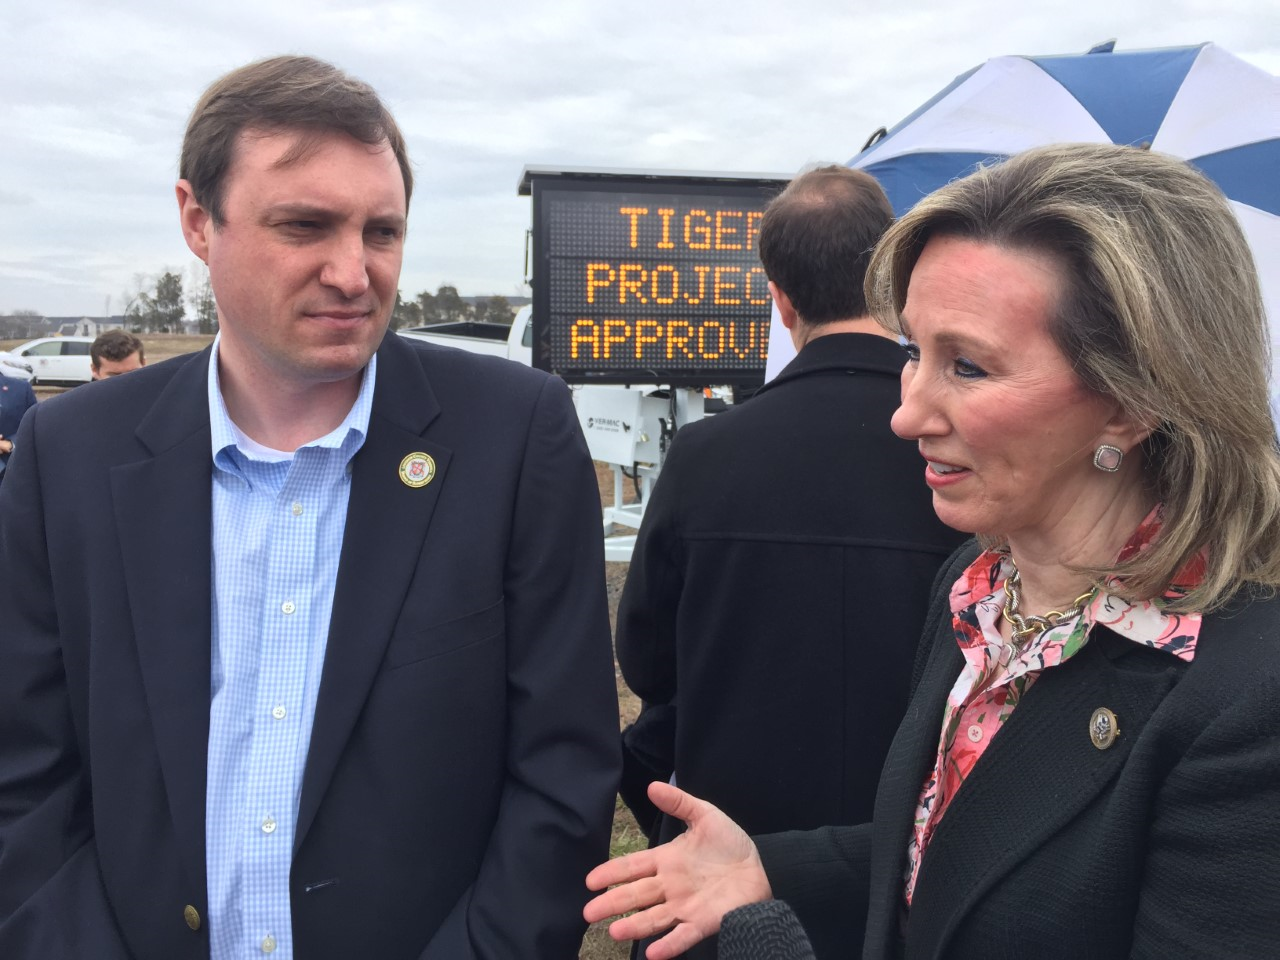 Loudoun County Supervisor Matthew F. Letourneau talks with Rep. Barbara Comstock (a Republican representing Virginia's 10th District), who helped the county's efforts when applying for the federal transportation grant. (WTOP/Kristi King)